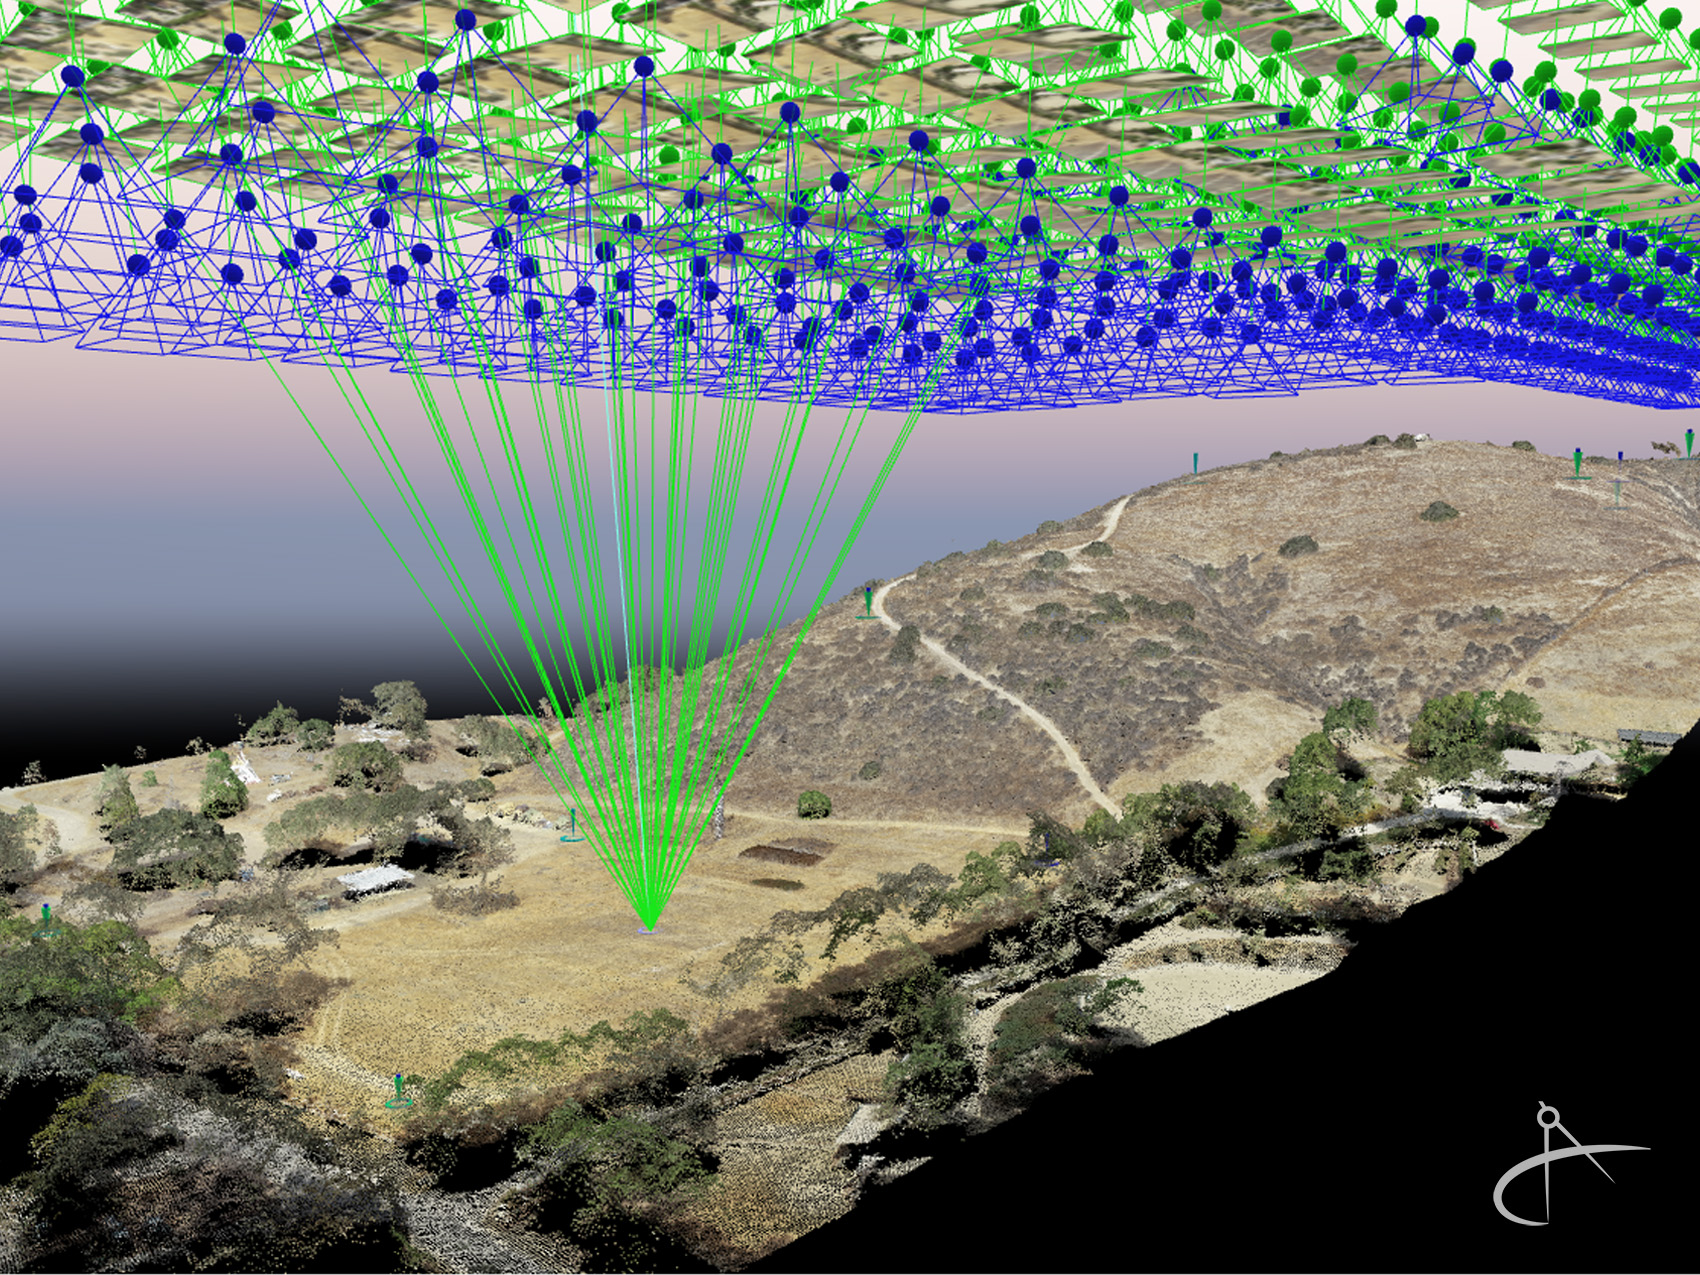 Point cloud of hillside and arrayed images.